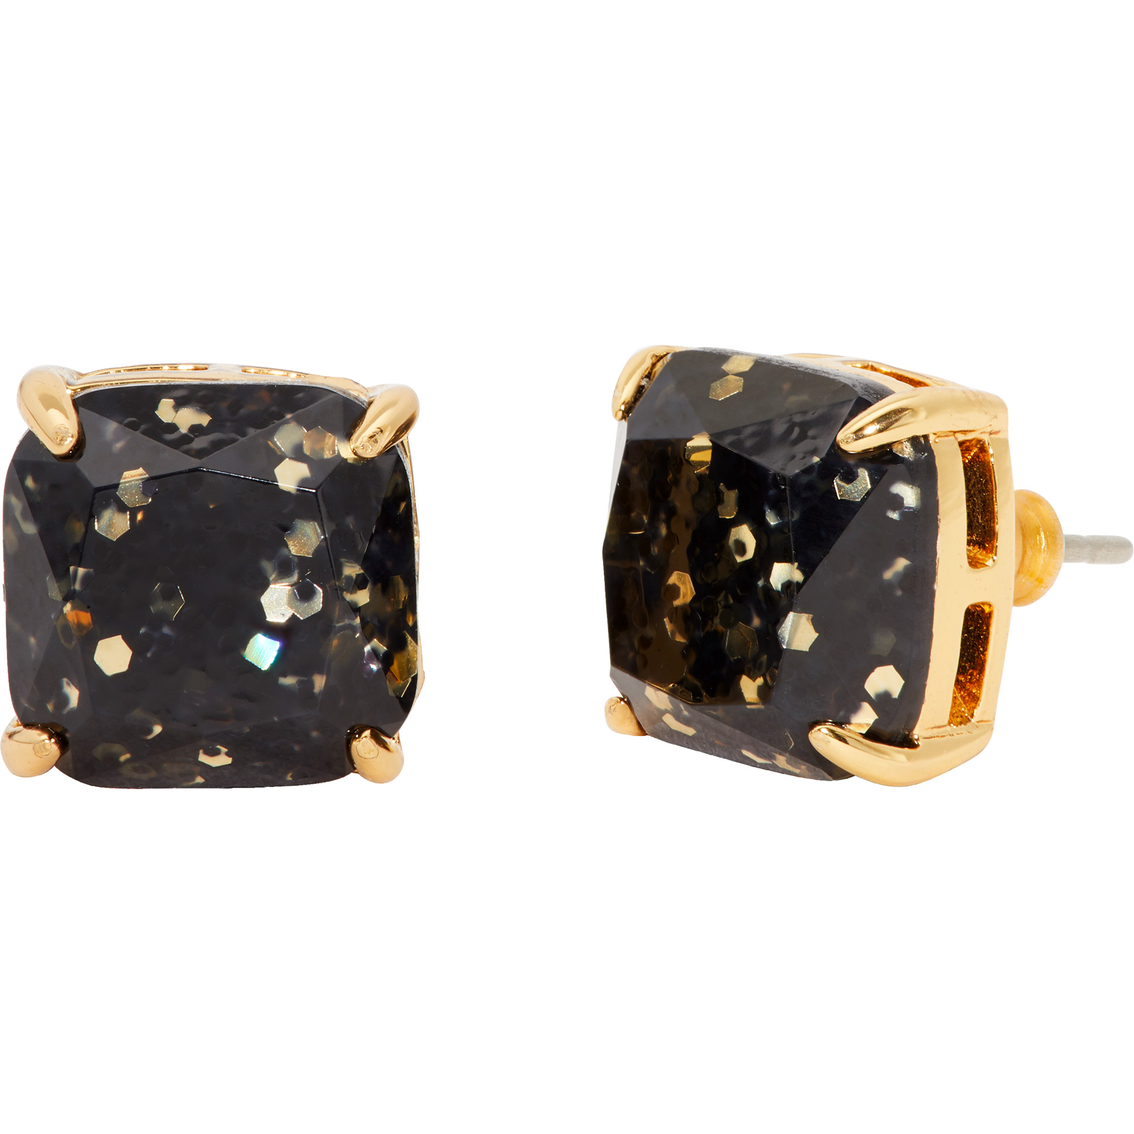 Kate Spade New York Small Square Stud Earrings - Image 2 of 3